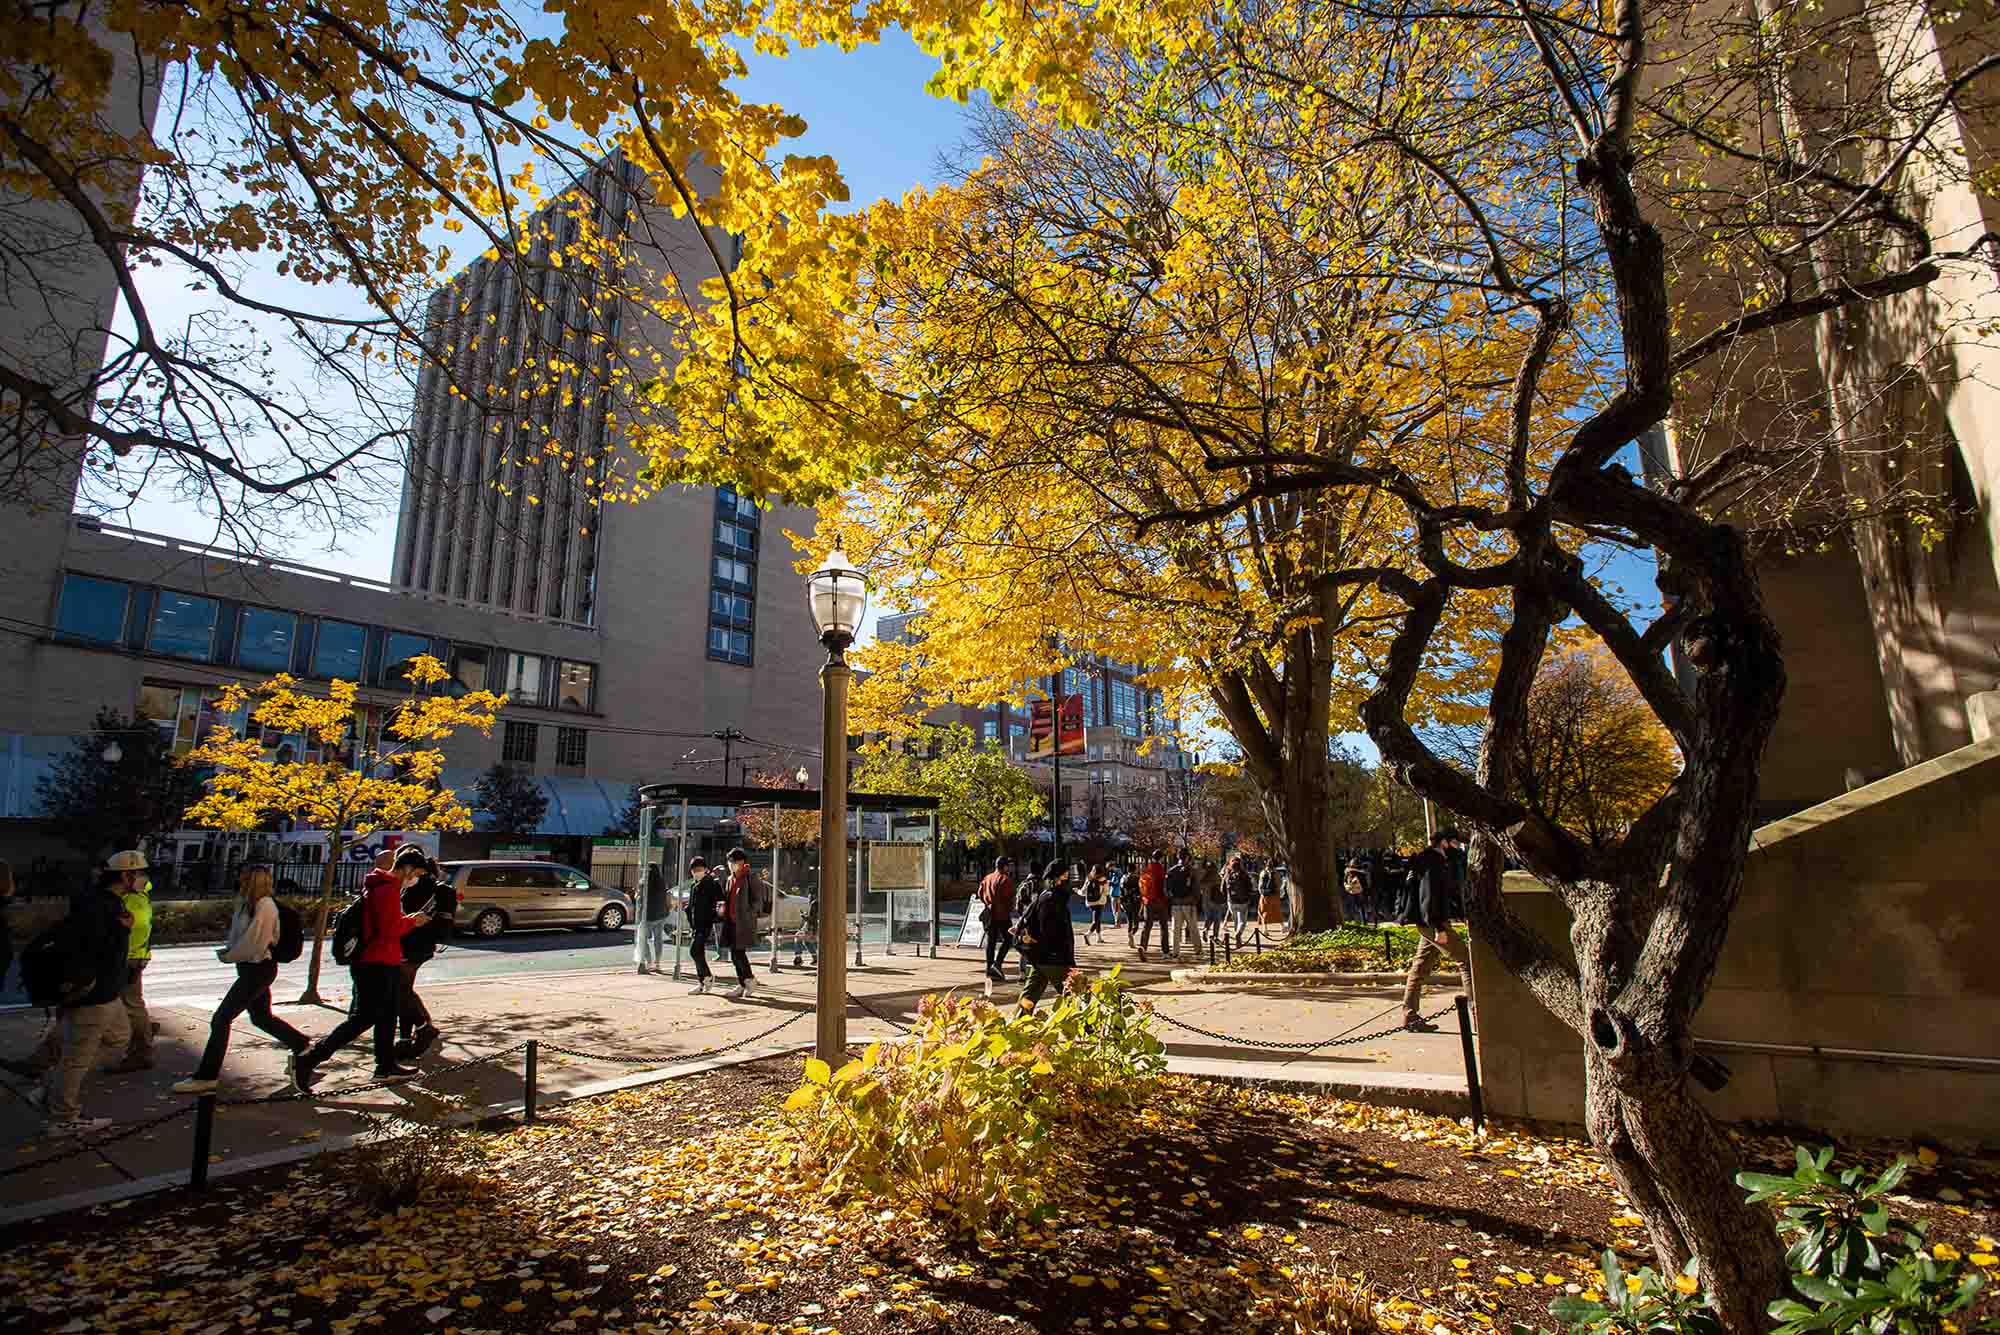 Photo: Fall stock photo of BU campus. Trees with orange and yellow leaves line the sidewalks of Comm Ave as pedestrians walk by the campus.